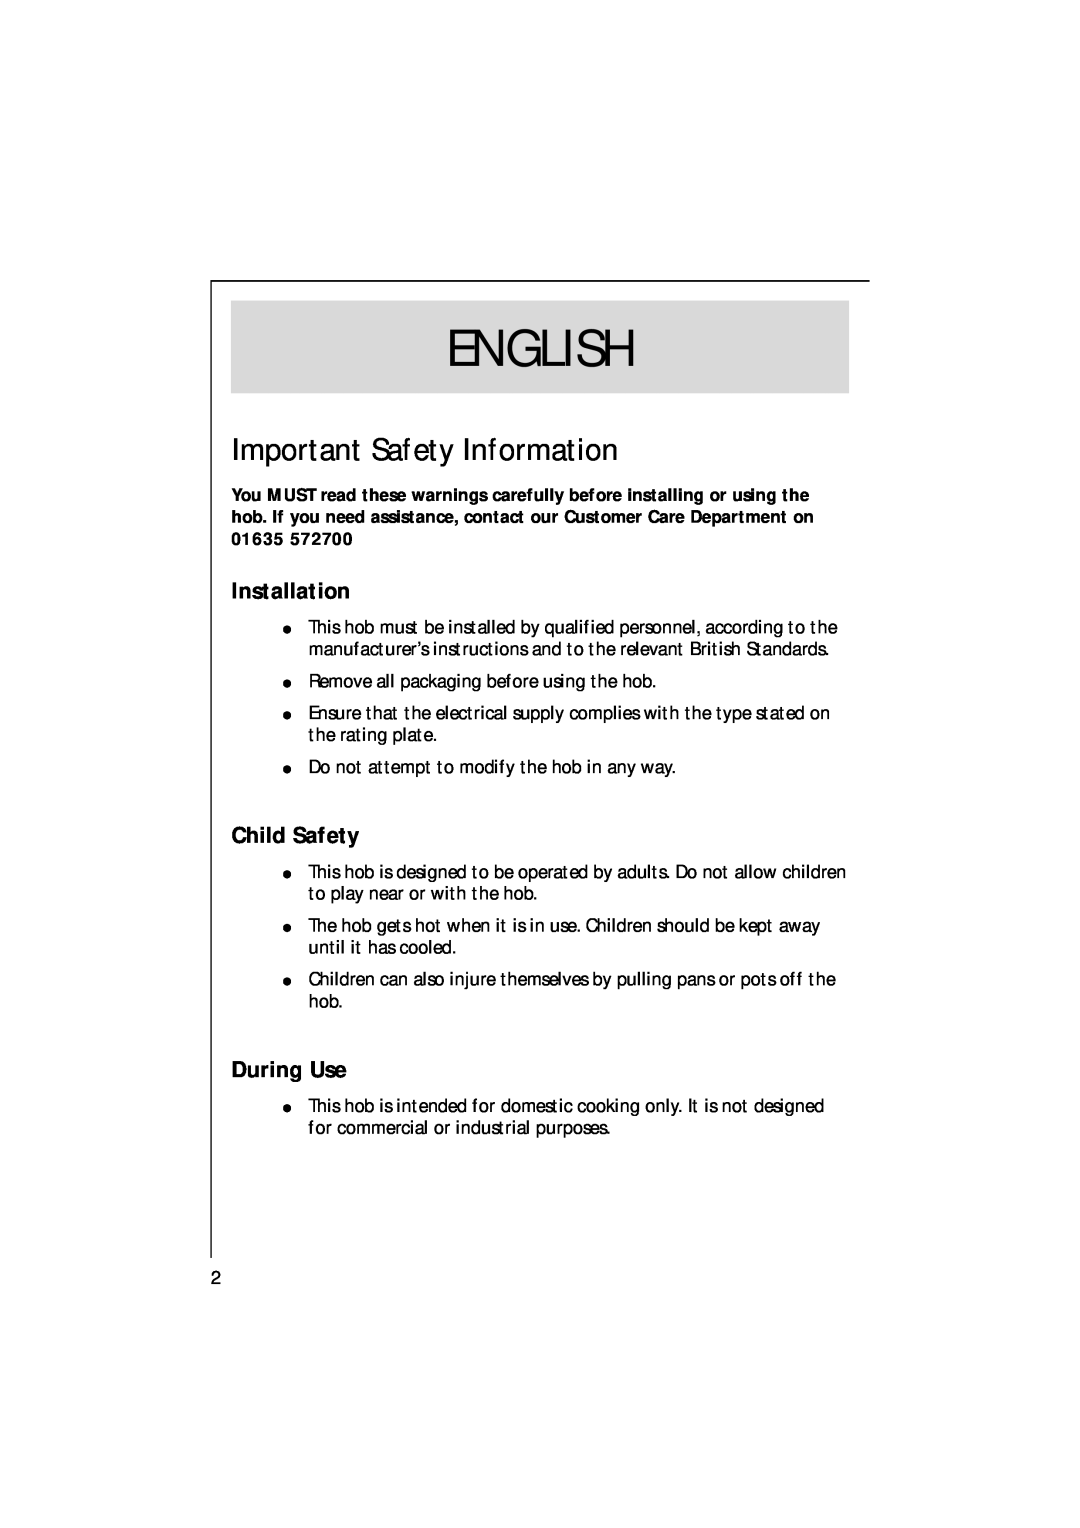 AEG 111 K - W/D/G manual Important Safety Information, Installation, Child Safety, During Use, English 